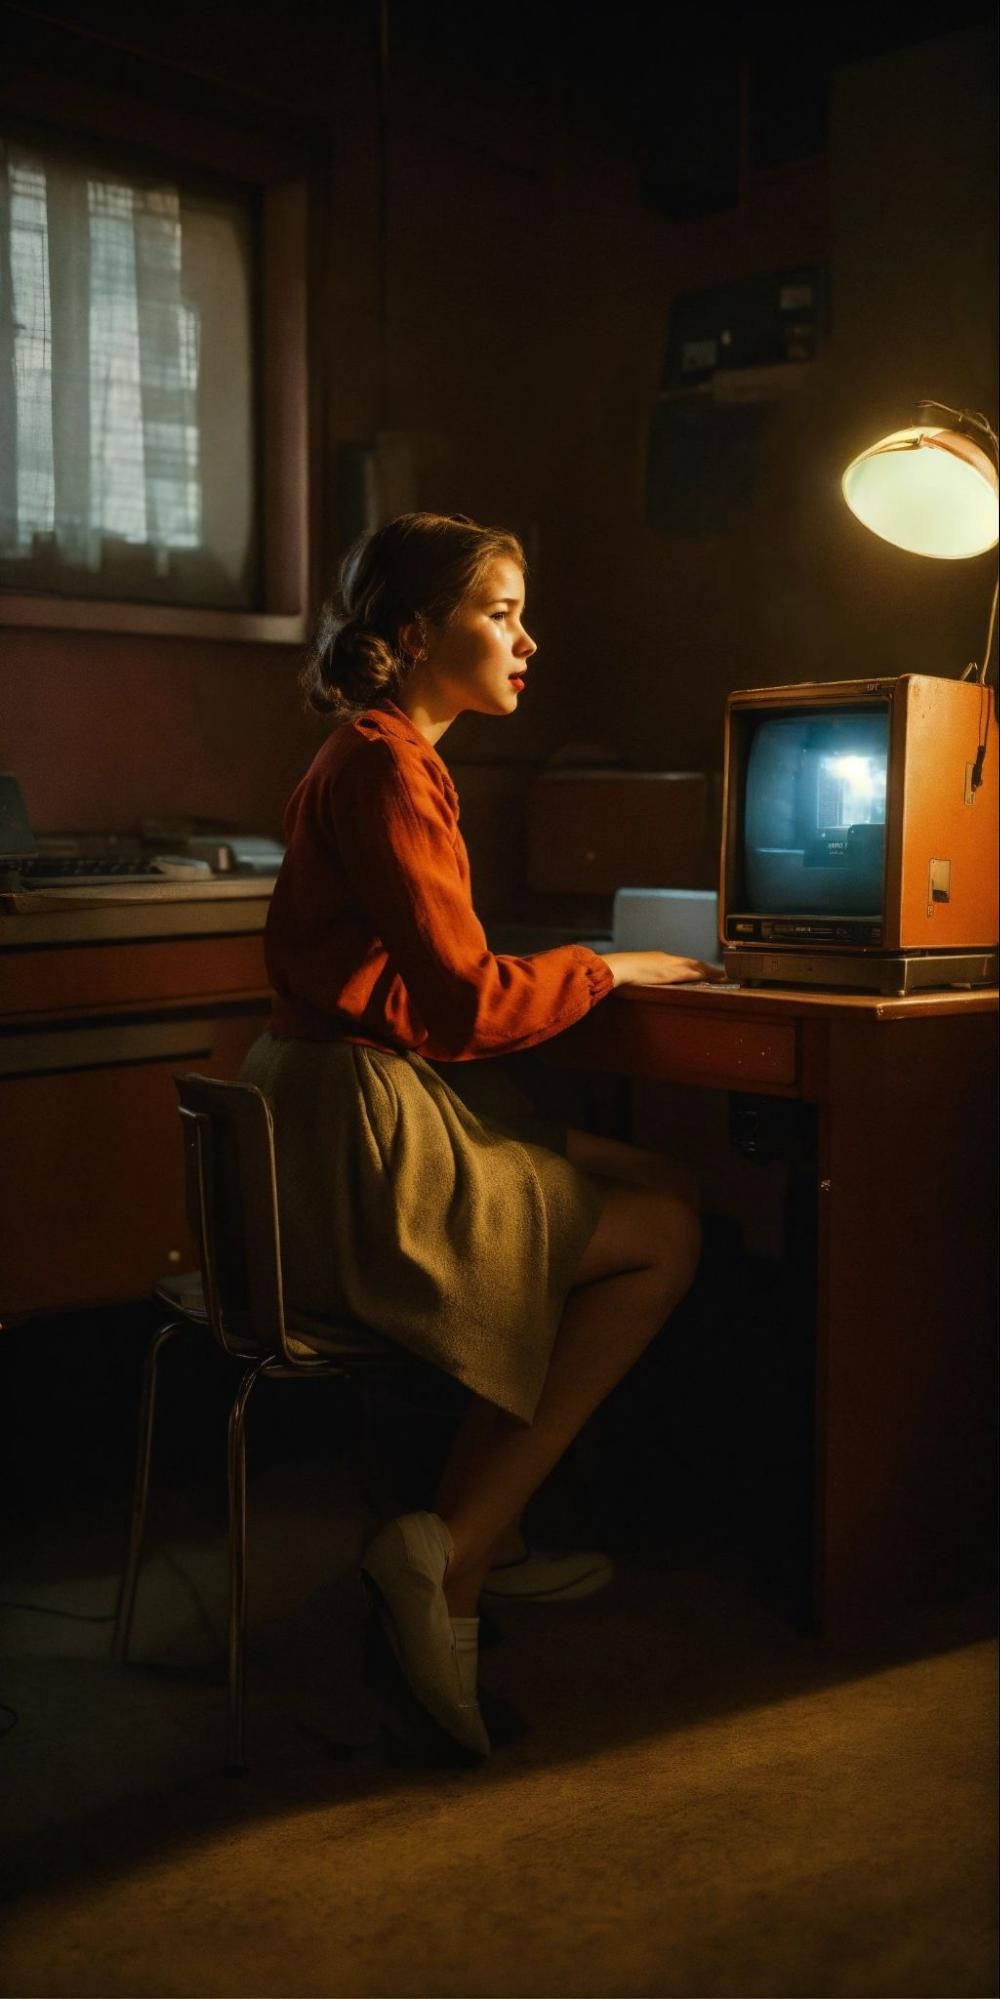 Soviet girl in front of a computer